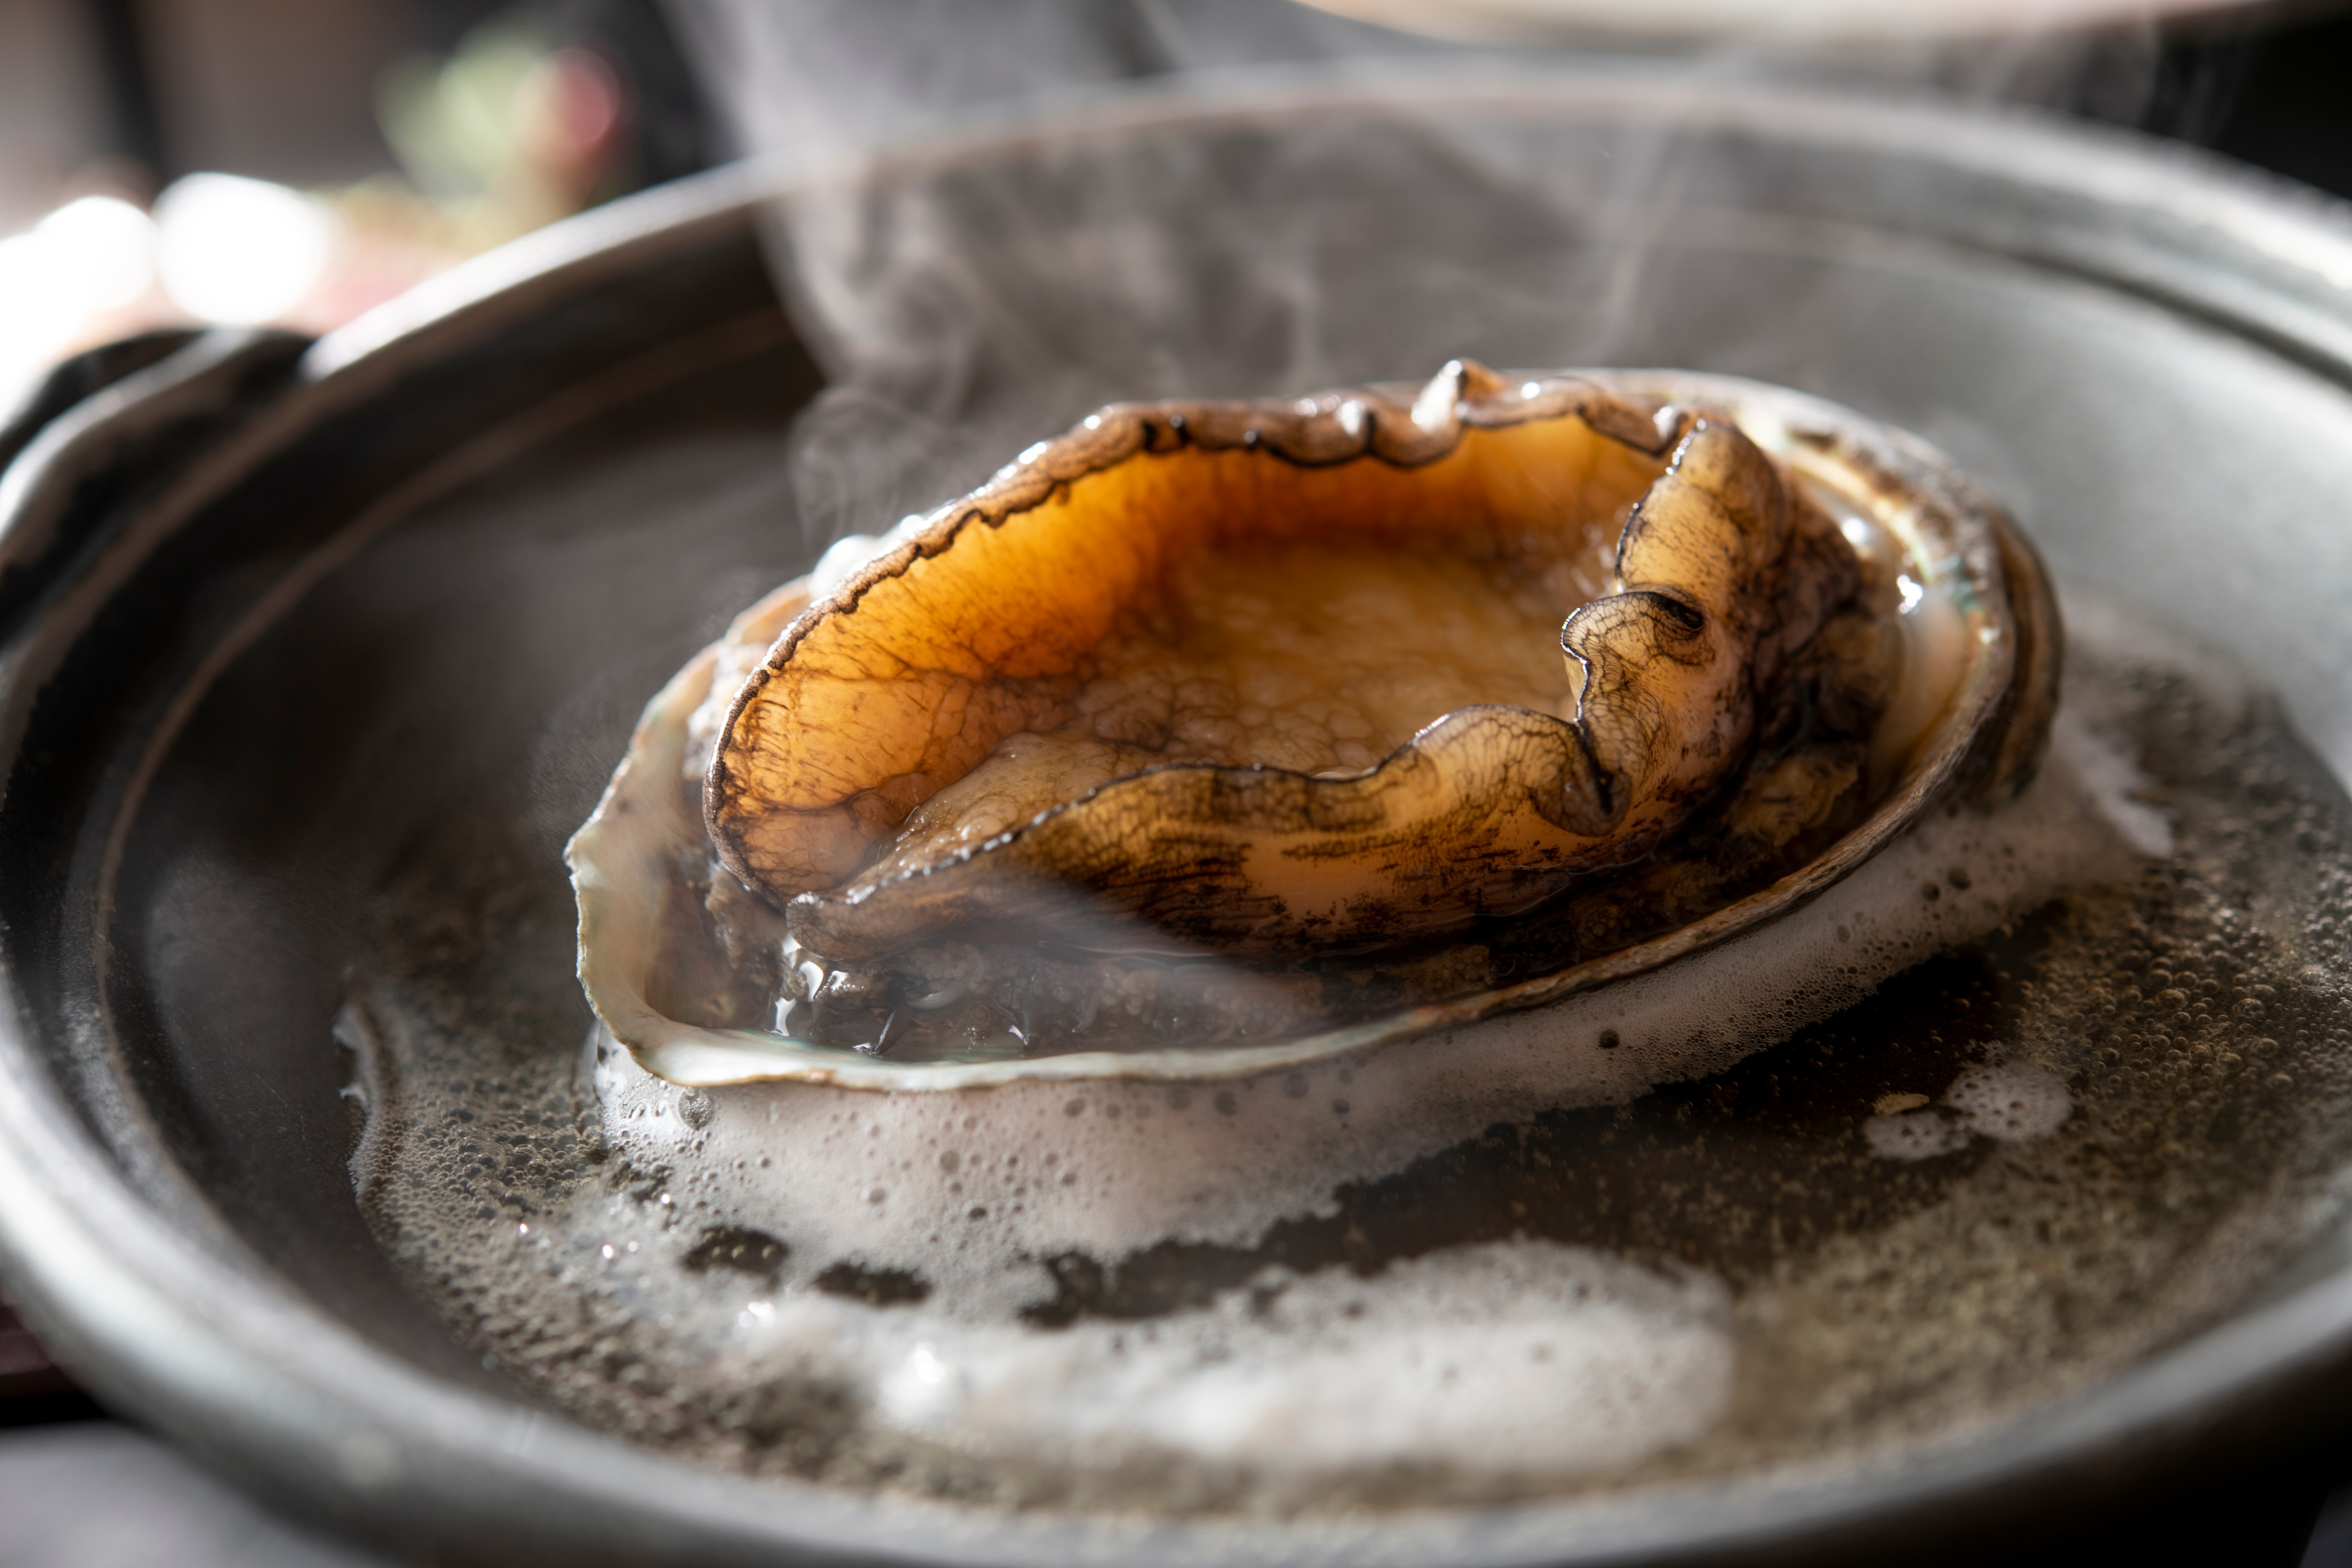 Abalone dishes